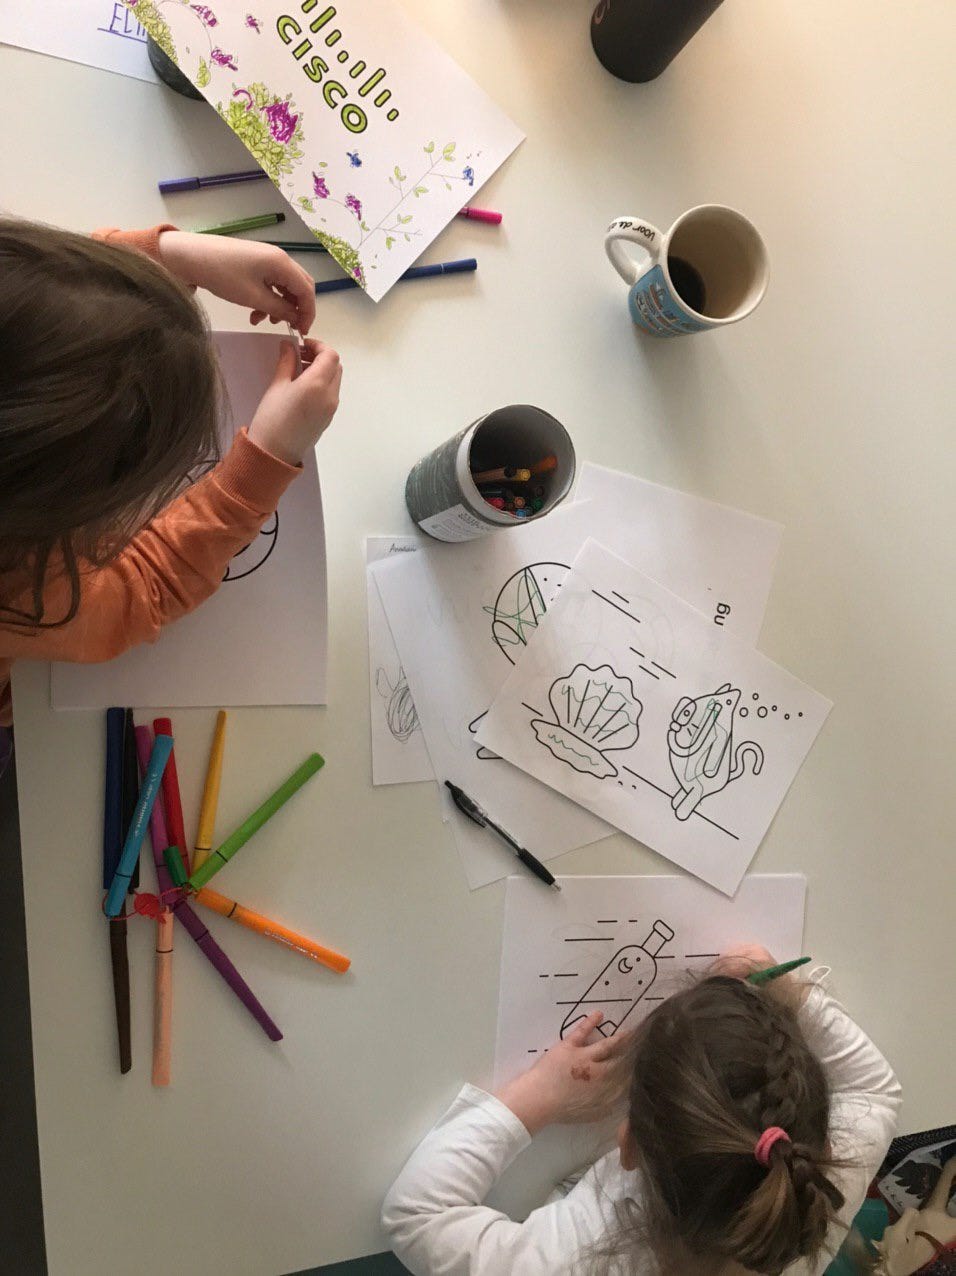 An overhead view of two children colouring in their pages